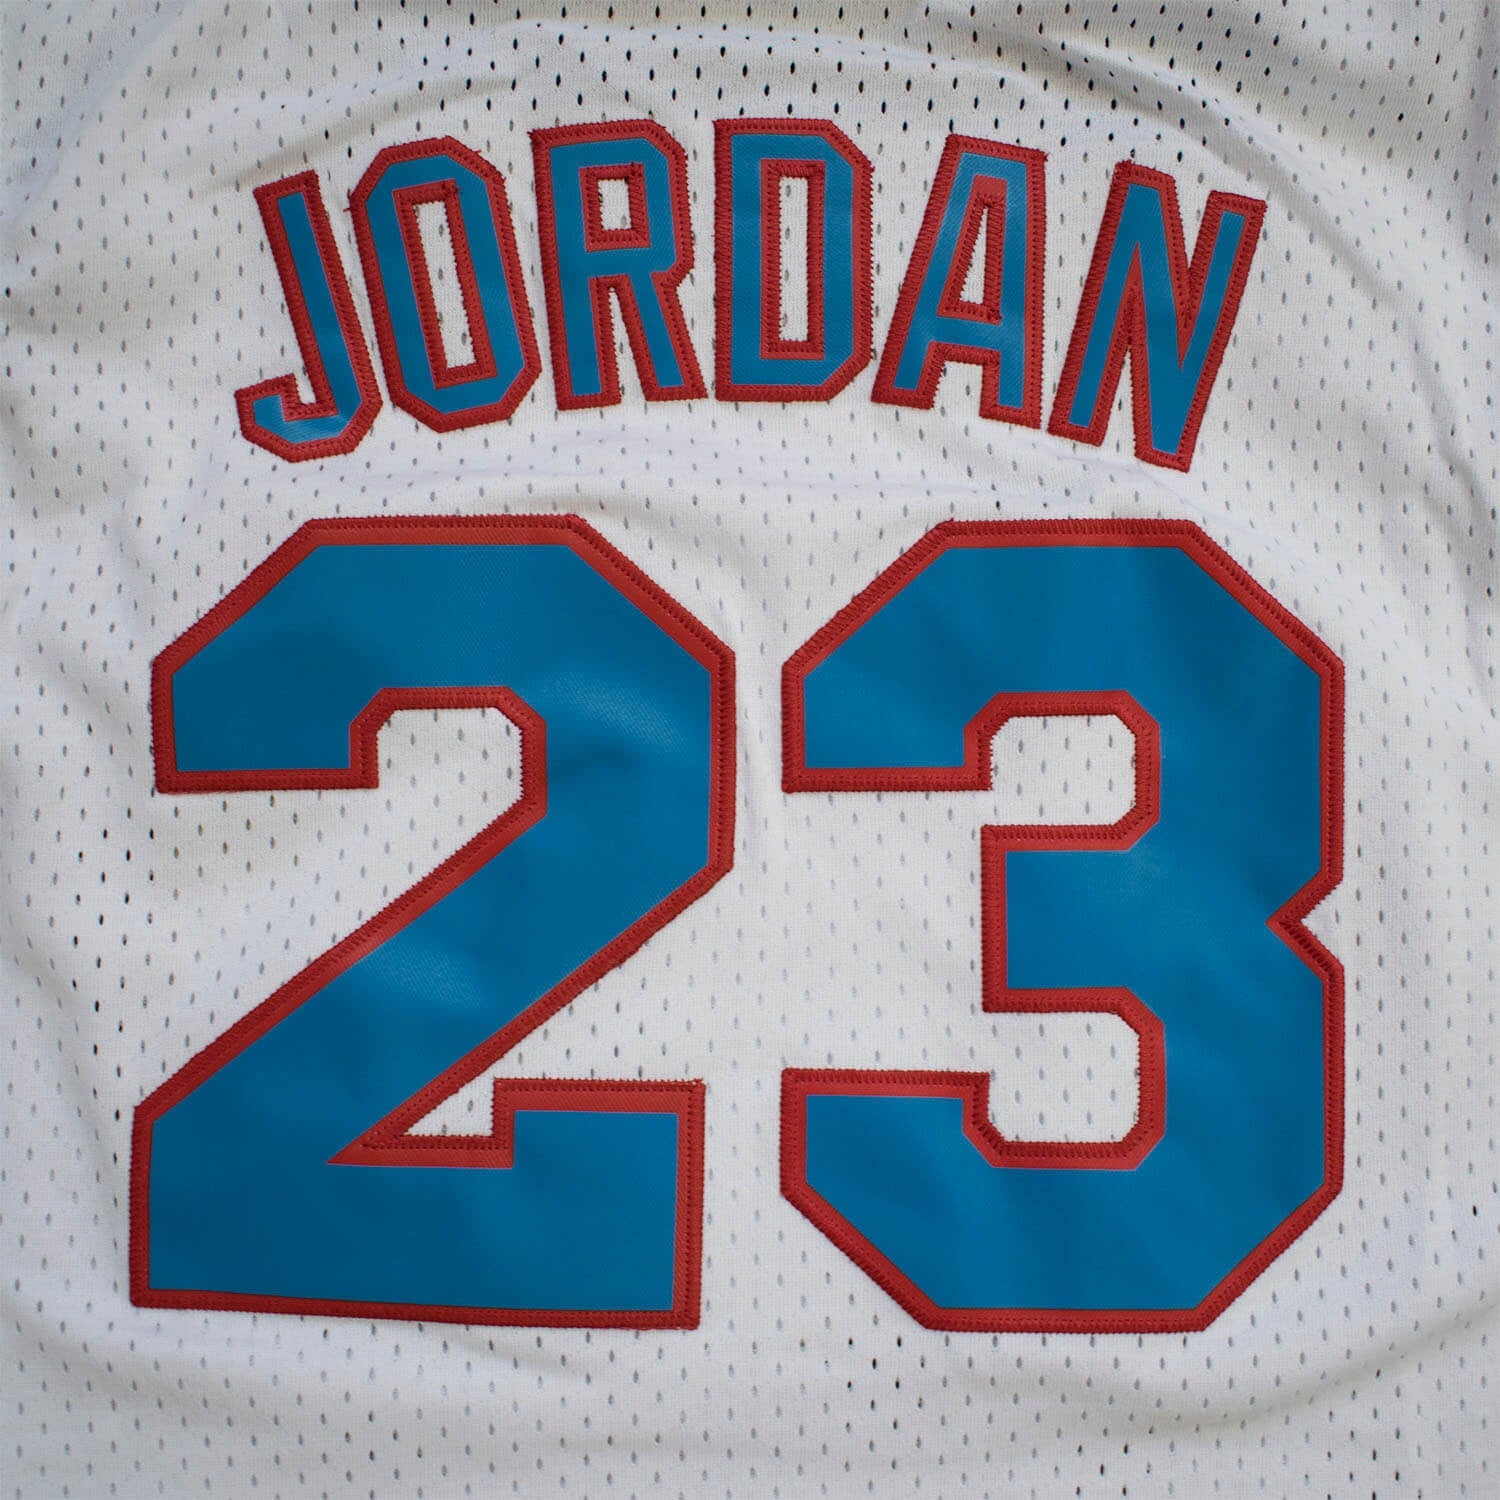 Michael Jordan #23 Toon Squad Looney Tunes Space Jam Jersey Stitched Small